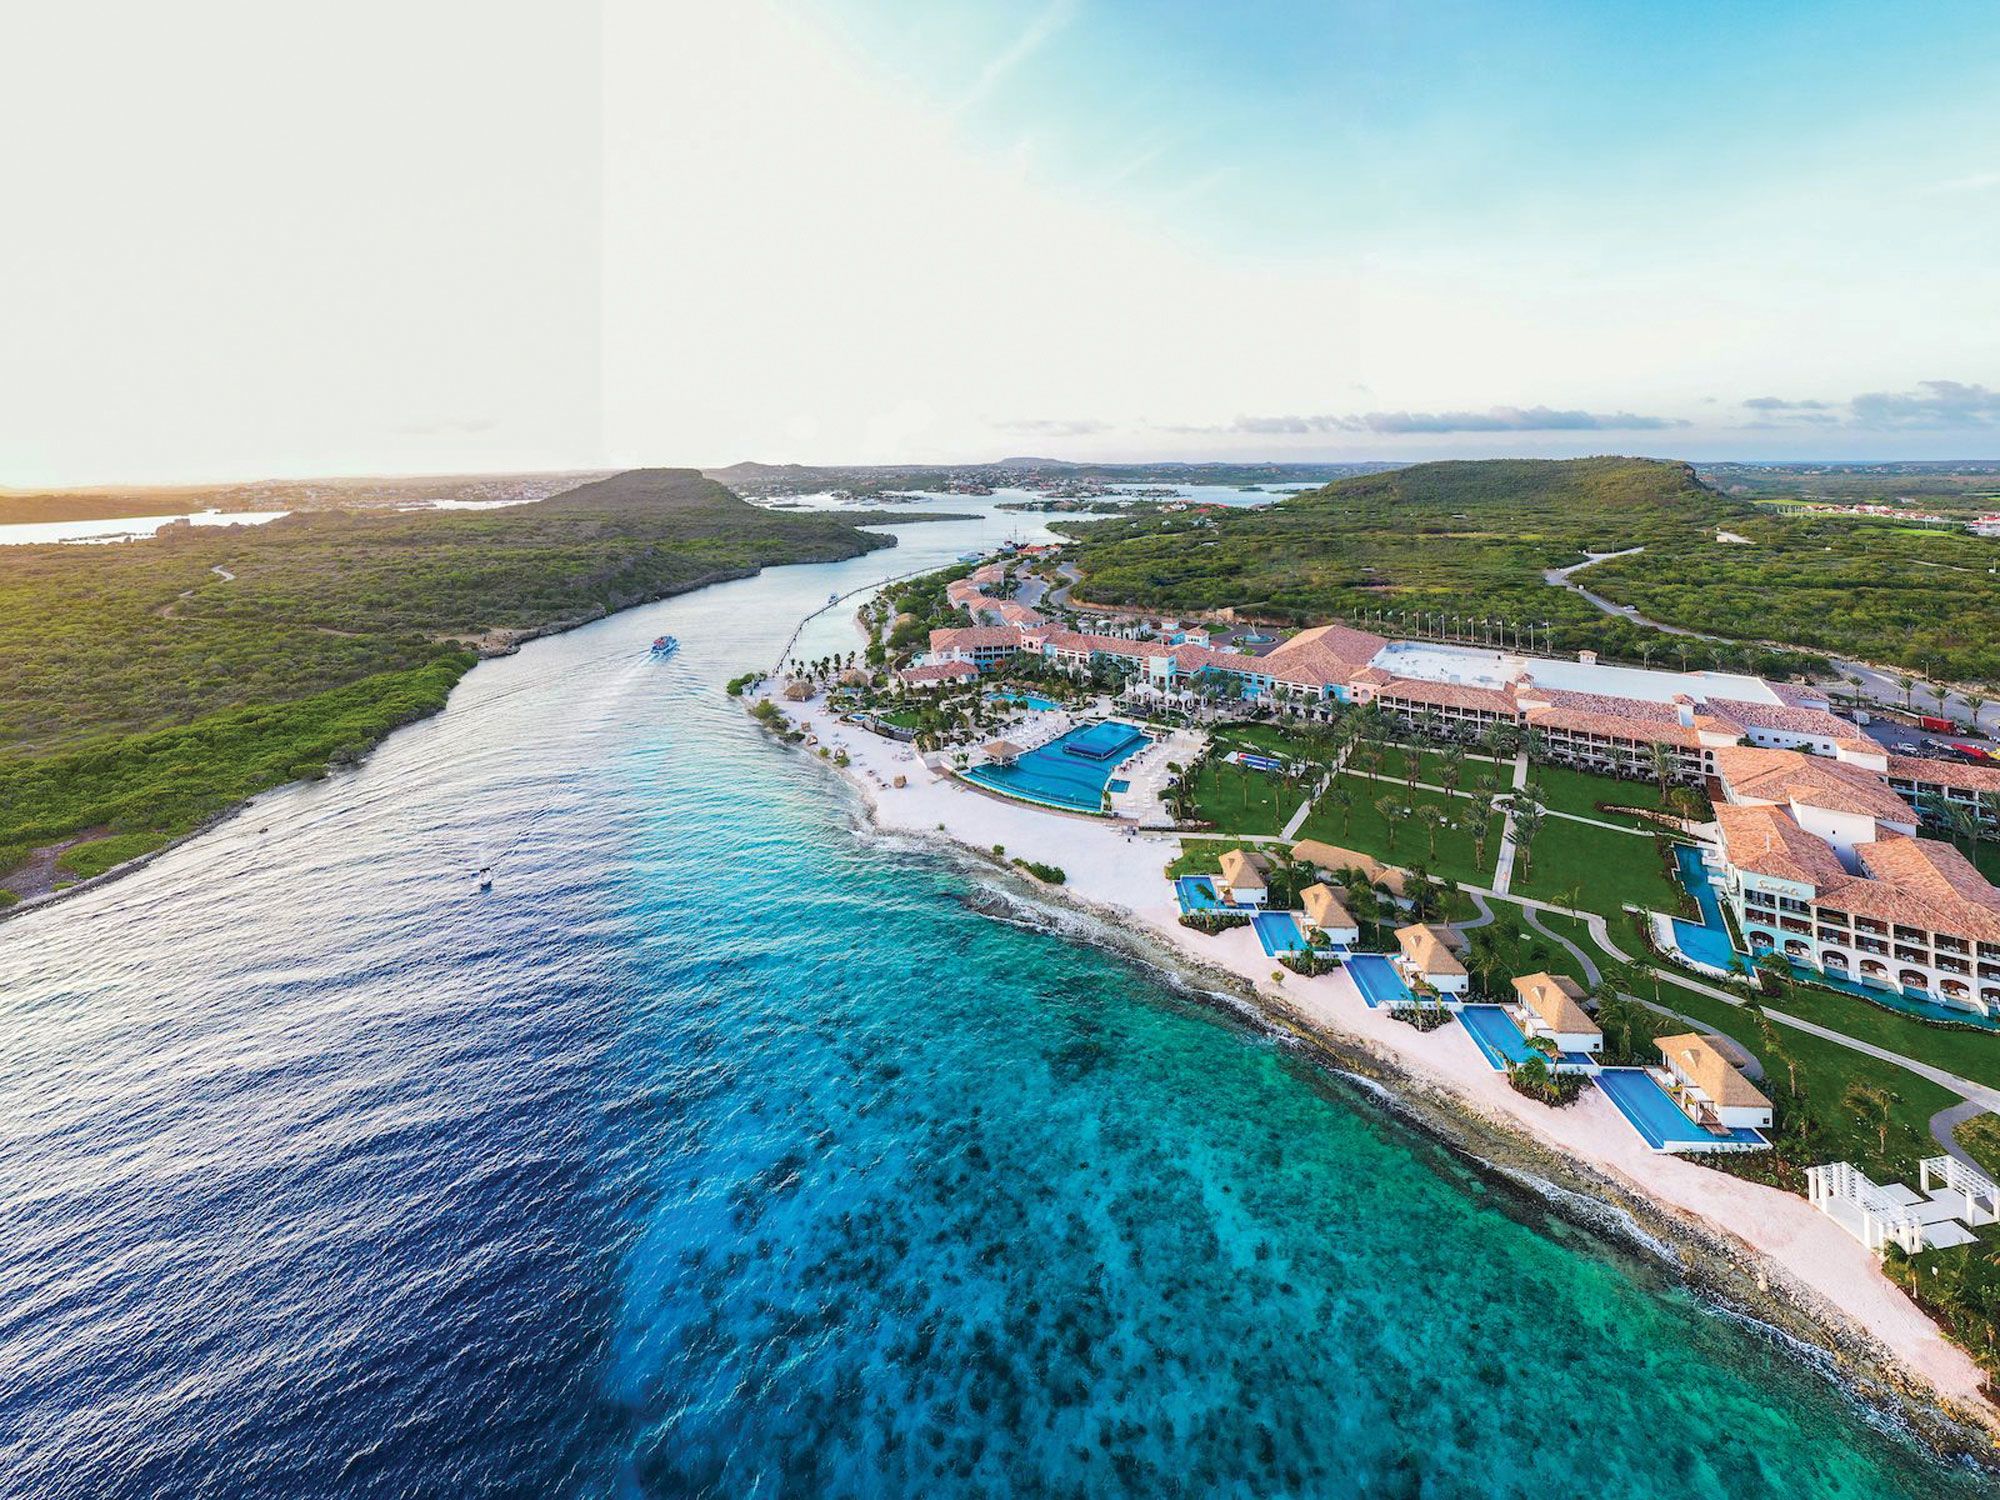 The new Sandals Royal Curacao is Sandals’ 16th resort. It features the brand’s first off-site dining program. (Photo by Corey Hamilton for Sandals Resorts)